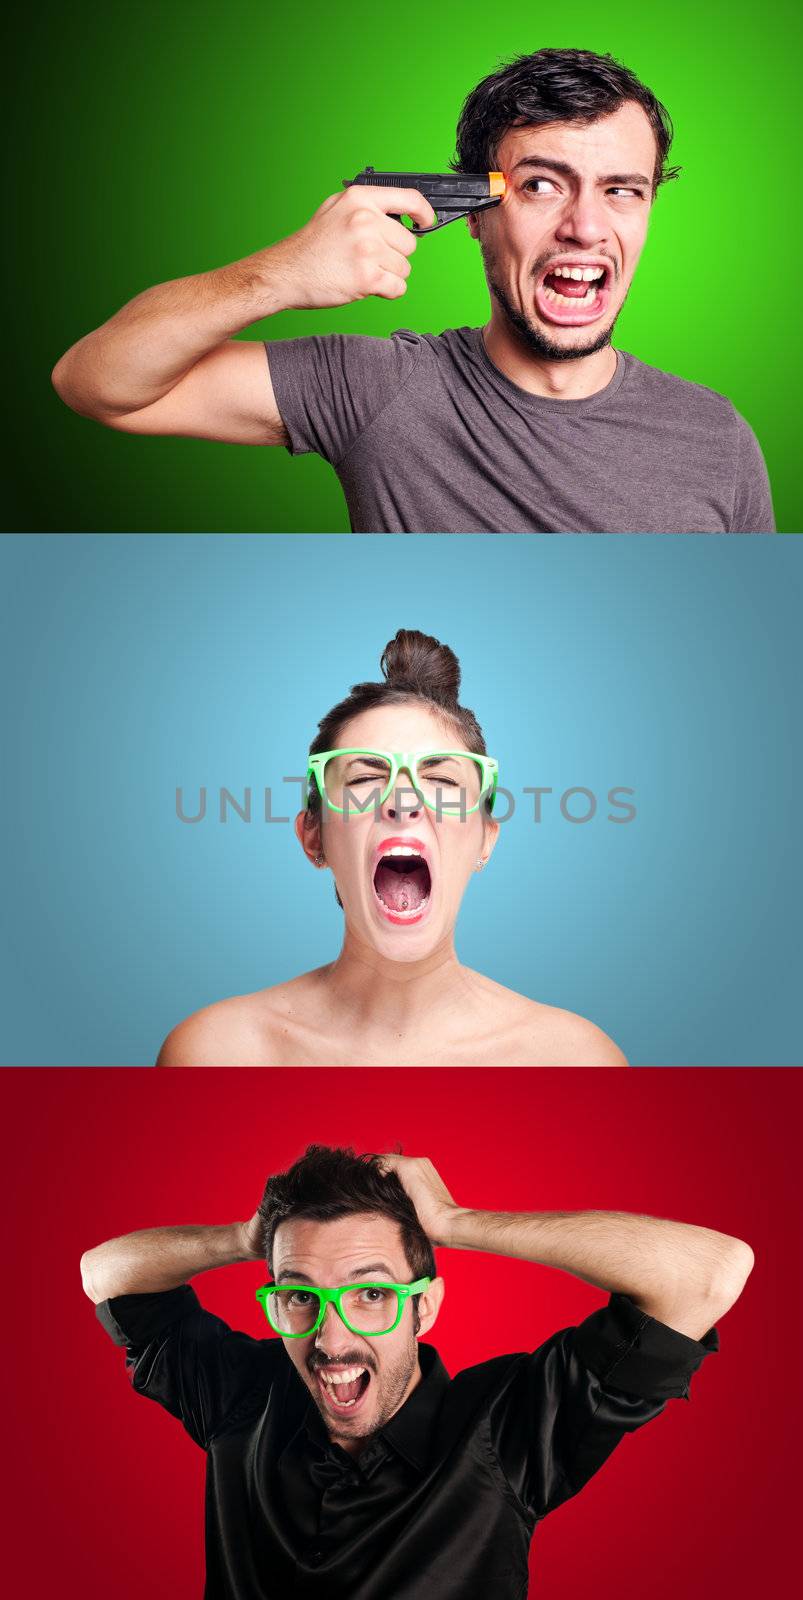 set of girl and two guys on colorful background